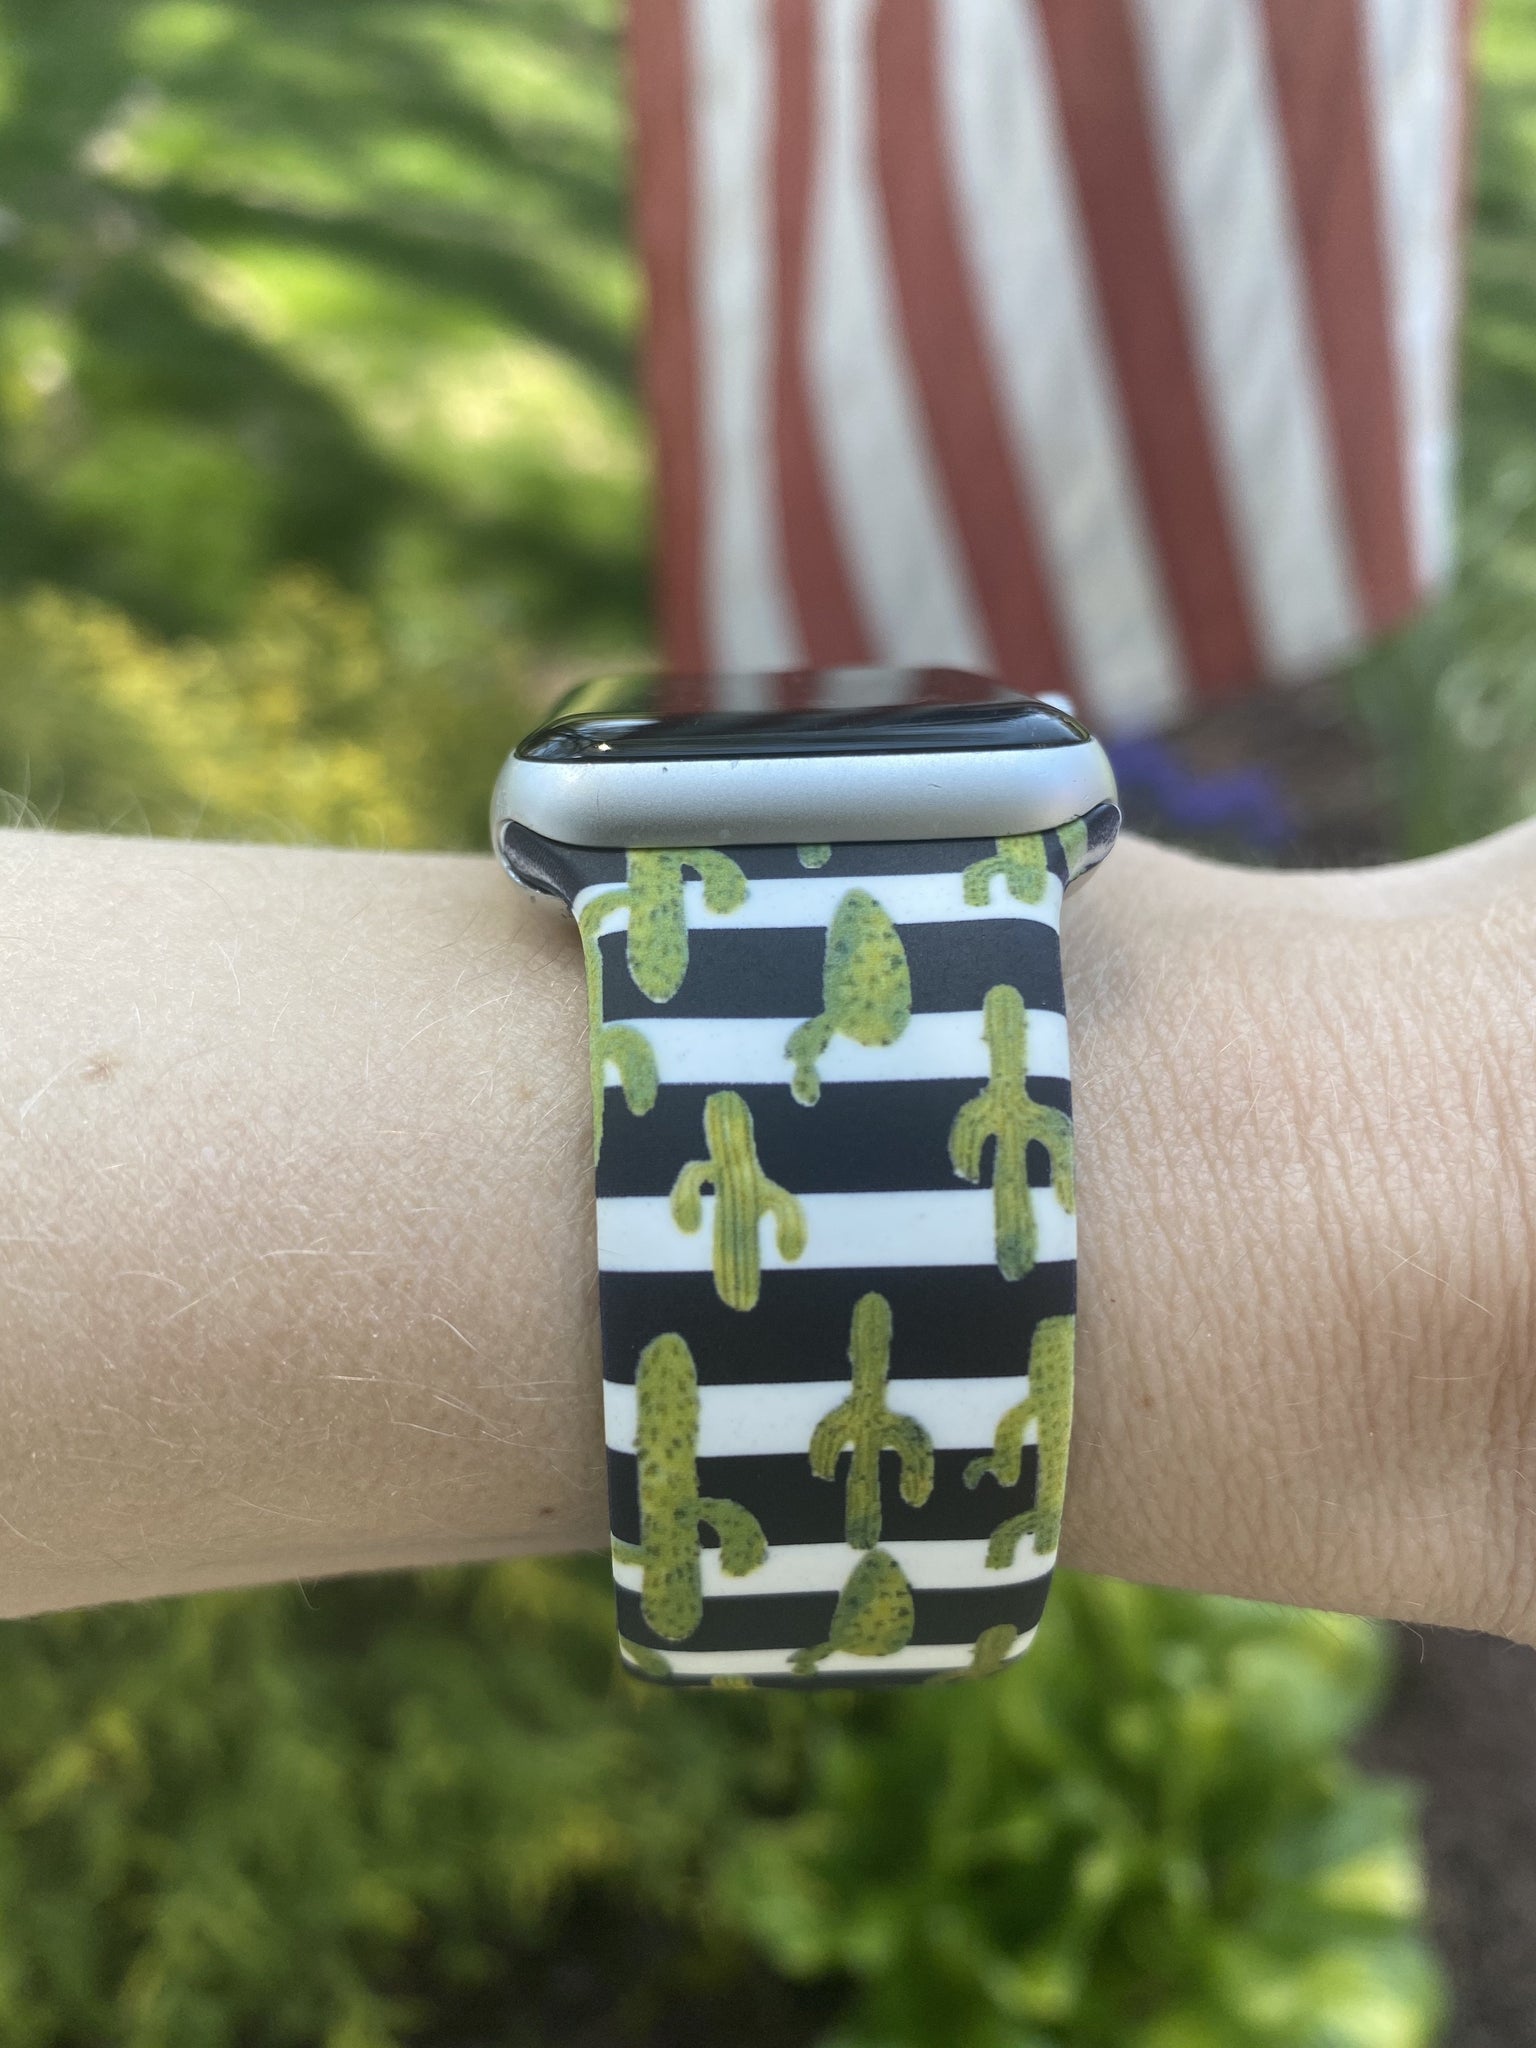 Stripe Cactus Plants Silicone Band for Apple Watch